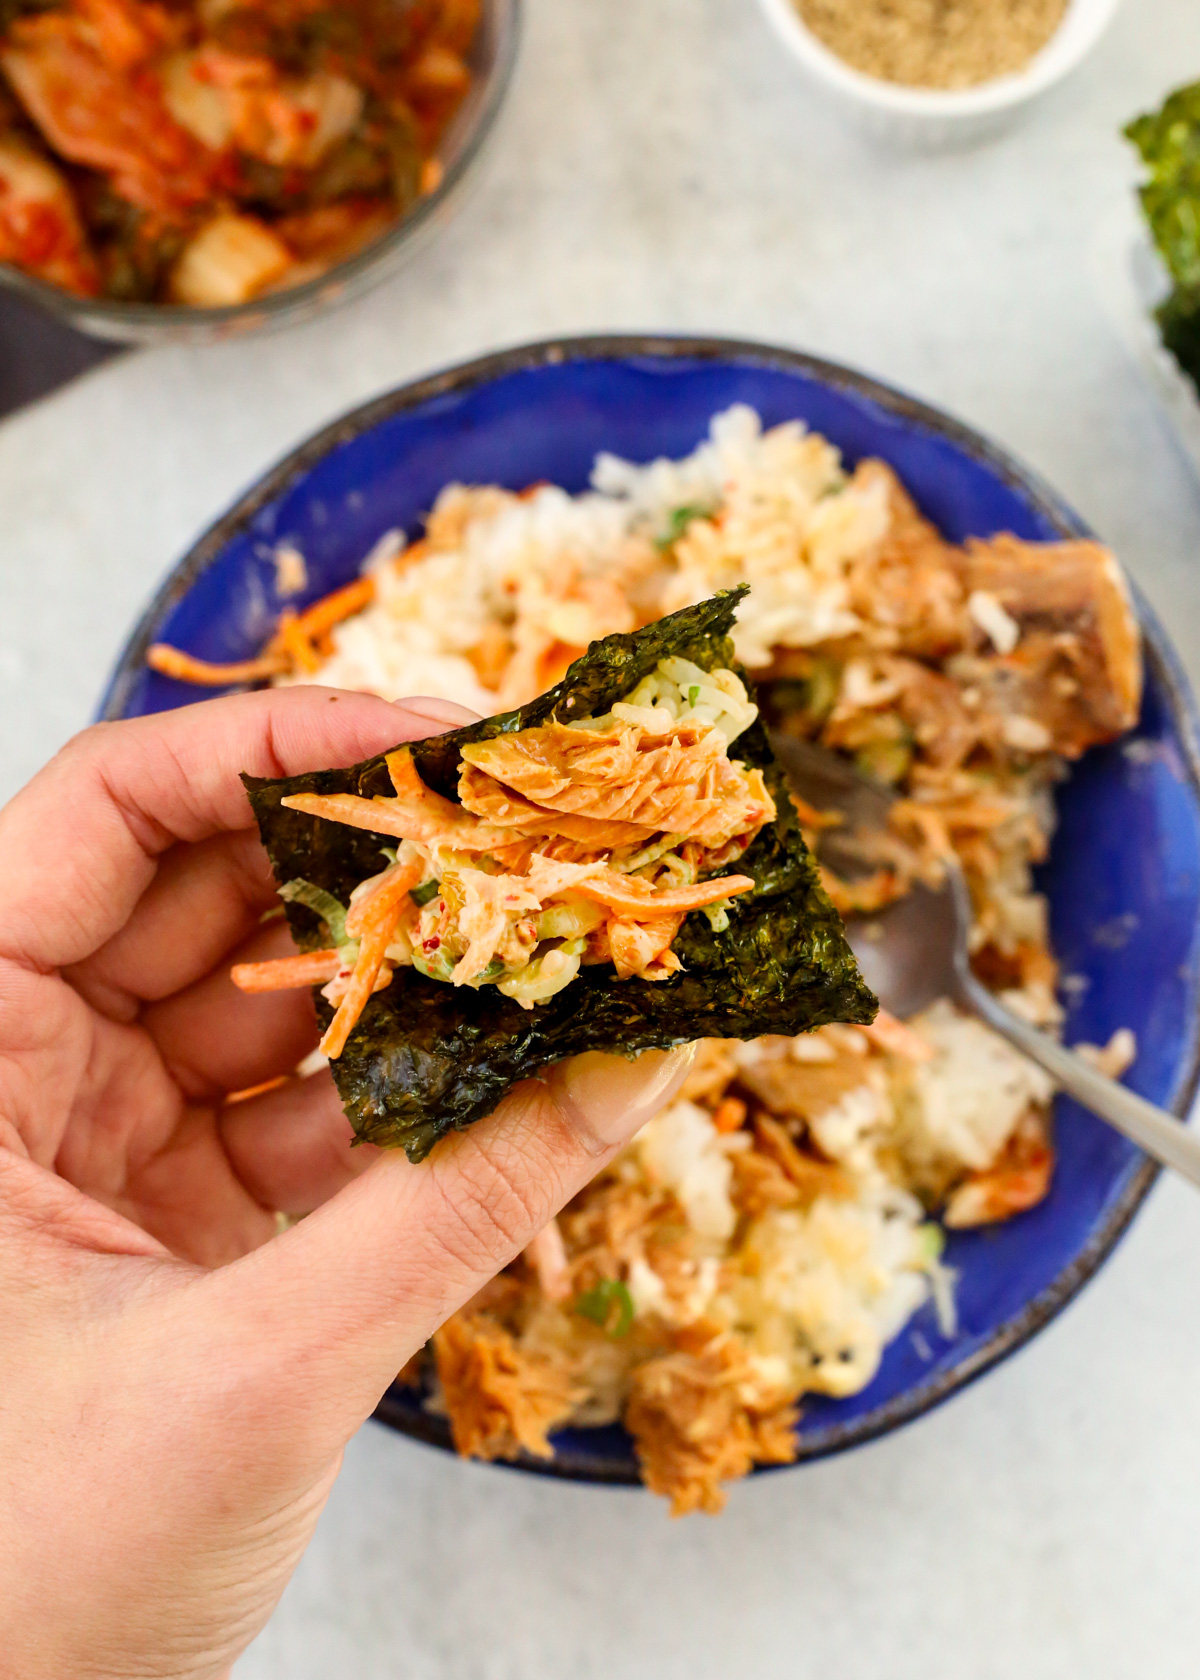 A woman's hand with manicured nails holds a bite of chamchi deopbap (Korean tuna rice bowl) wrapped in gim, a small sheet of dried and roasted seaweed, with the mixed bowl visible in the background